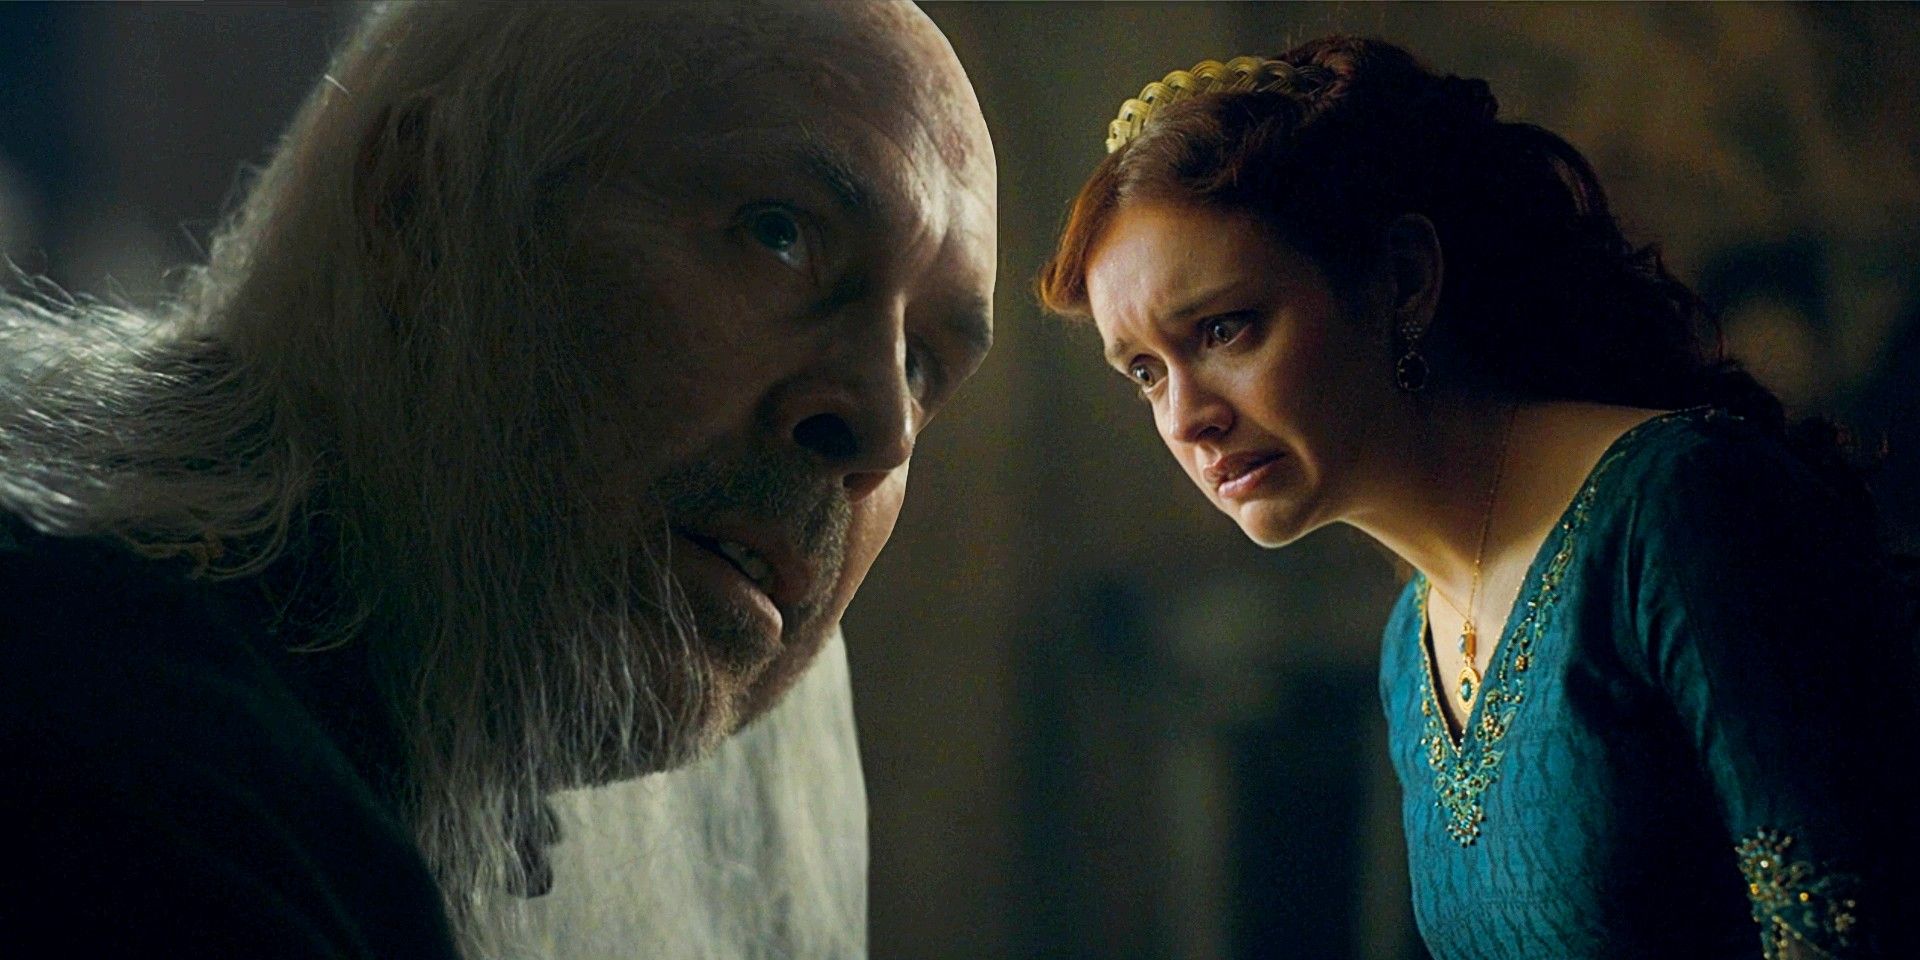 Paddy Considine as Viserys Targaryen and Olivia Cooke as Alicent Hightower in House of the Dragon episode 6.